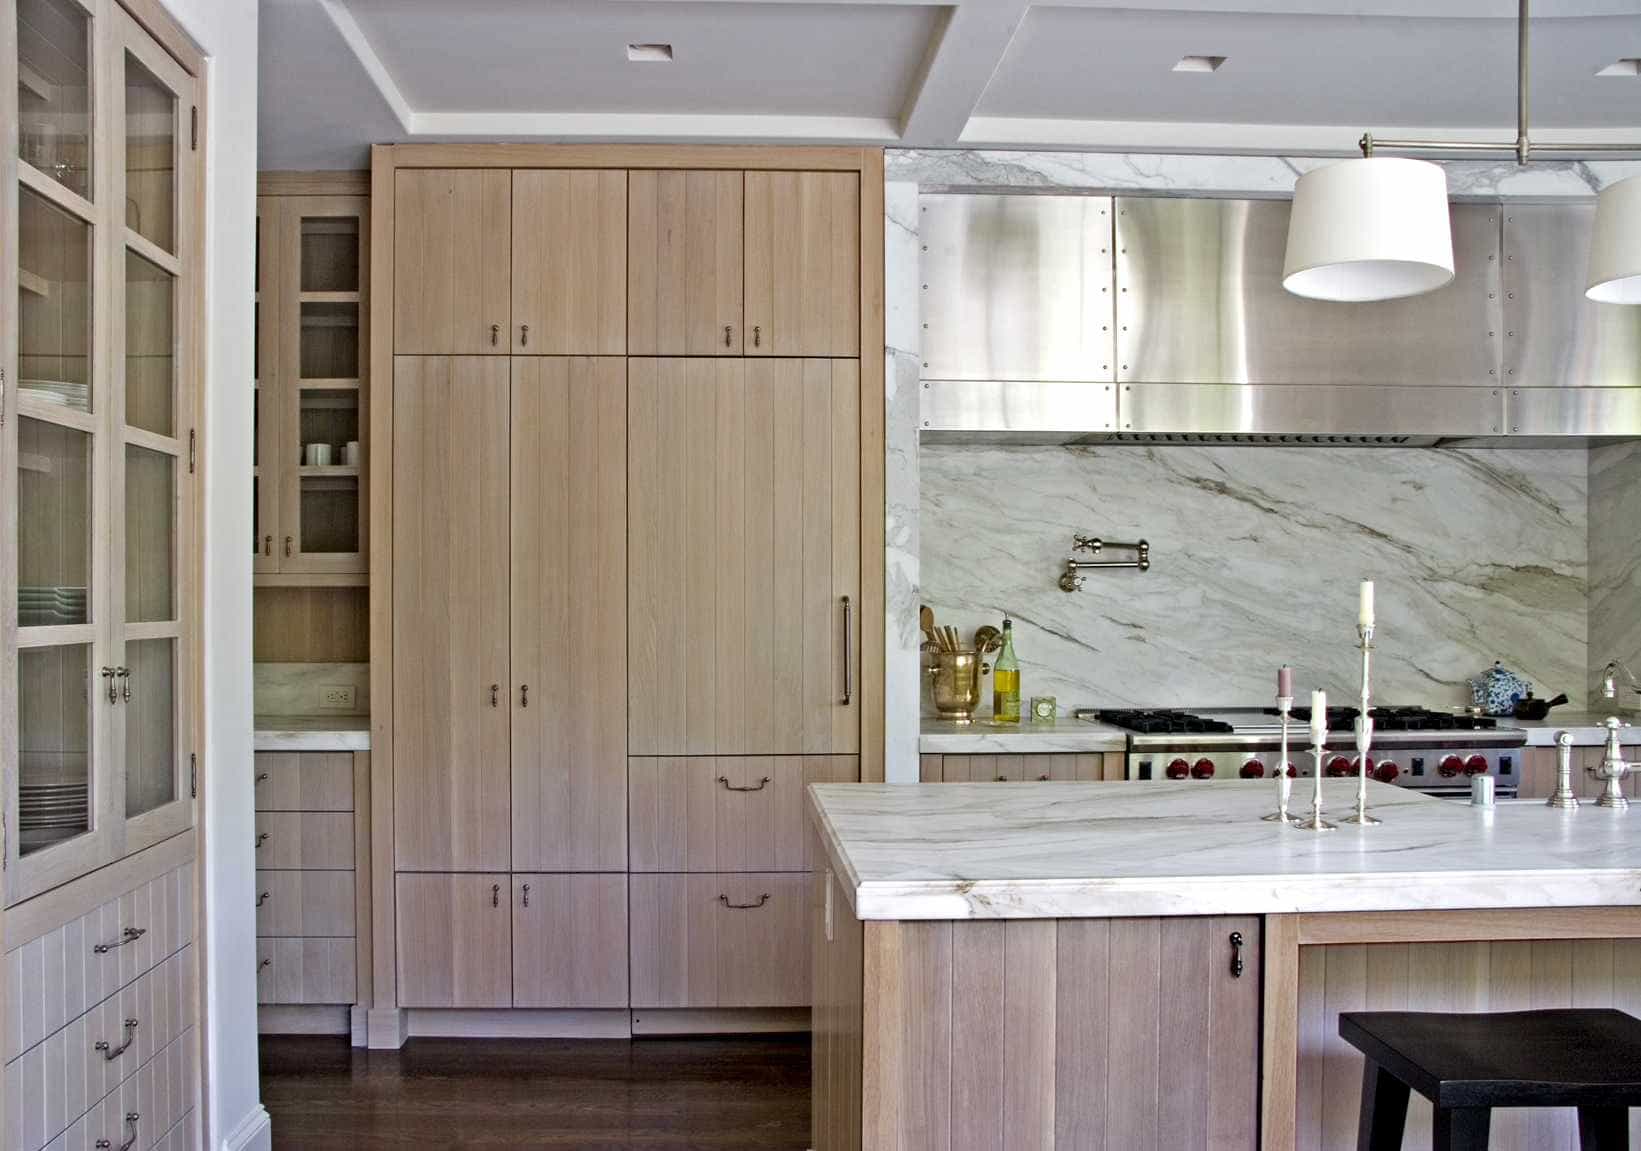 Revitalize Your Kitchen The Guide to Whitewash Kitchen Cabinets